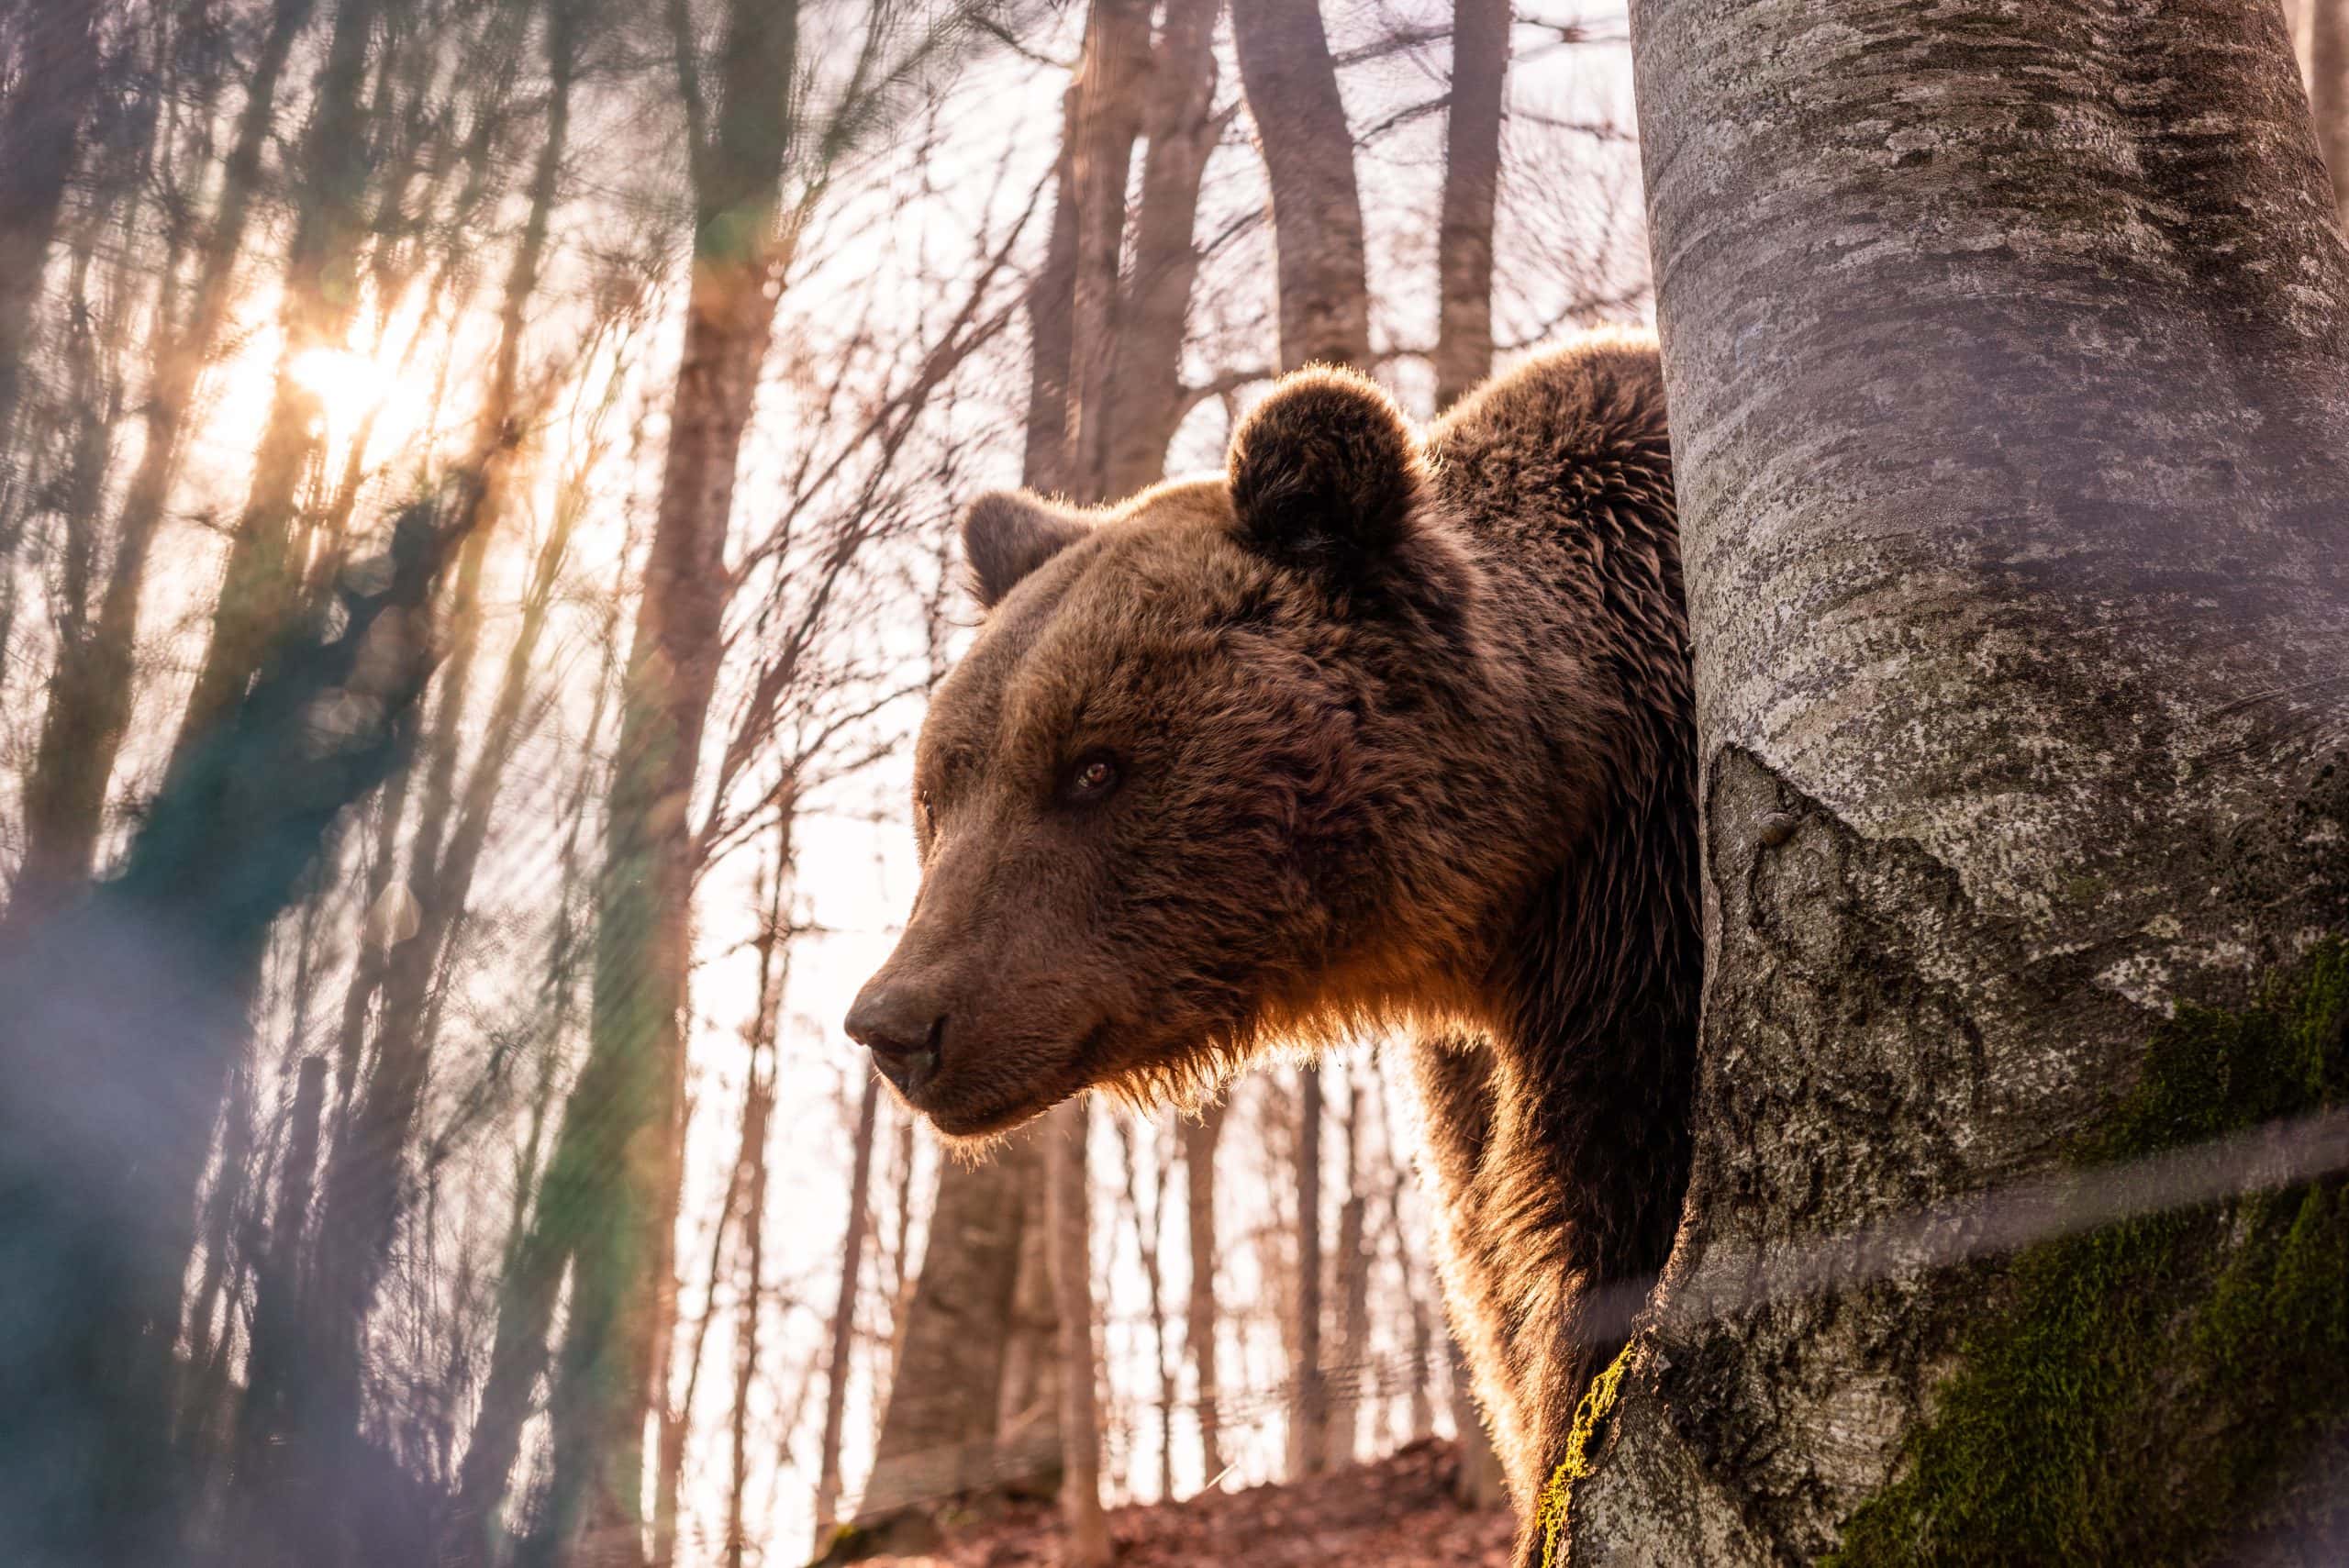 A Brown Bear At The Arcturos Environmental Centre And Bear Sanctuary In Greece. The Sanctuary Primarily Takes Care Of Injured And Mistreated Individuals Who Usually Cannot Be Released Into The Wild. Such Bears Have Suffered Severe Injuries Or Have Social Skills Problems From An Upbringing In Captivity And Would Not Survive On Their Own. Florina, Nymfaio, Greece, 2019. Odysseas Chloridis / We Animals Media